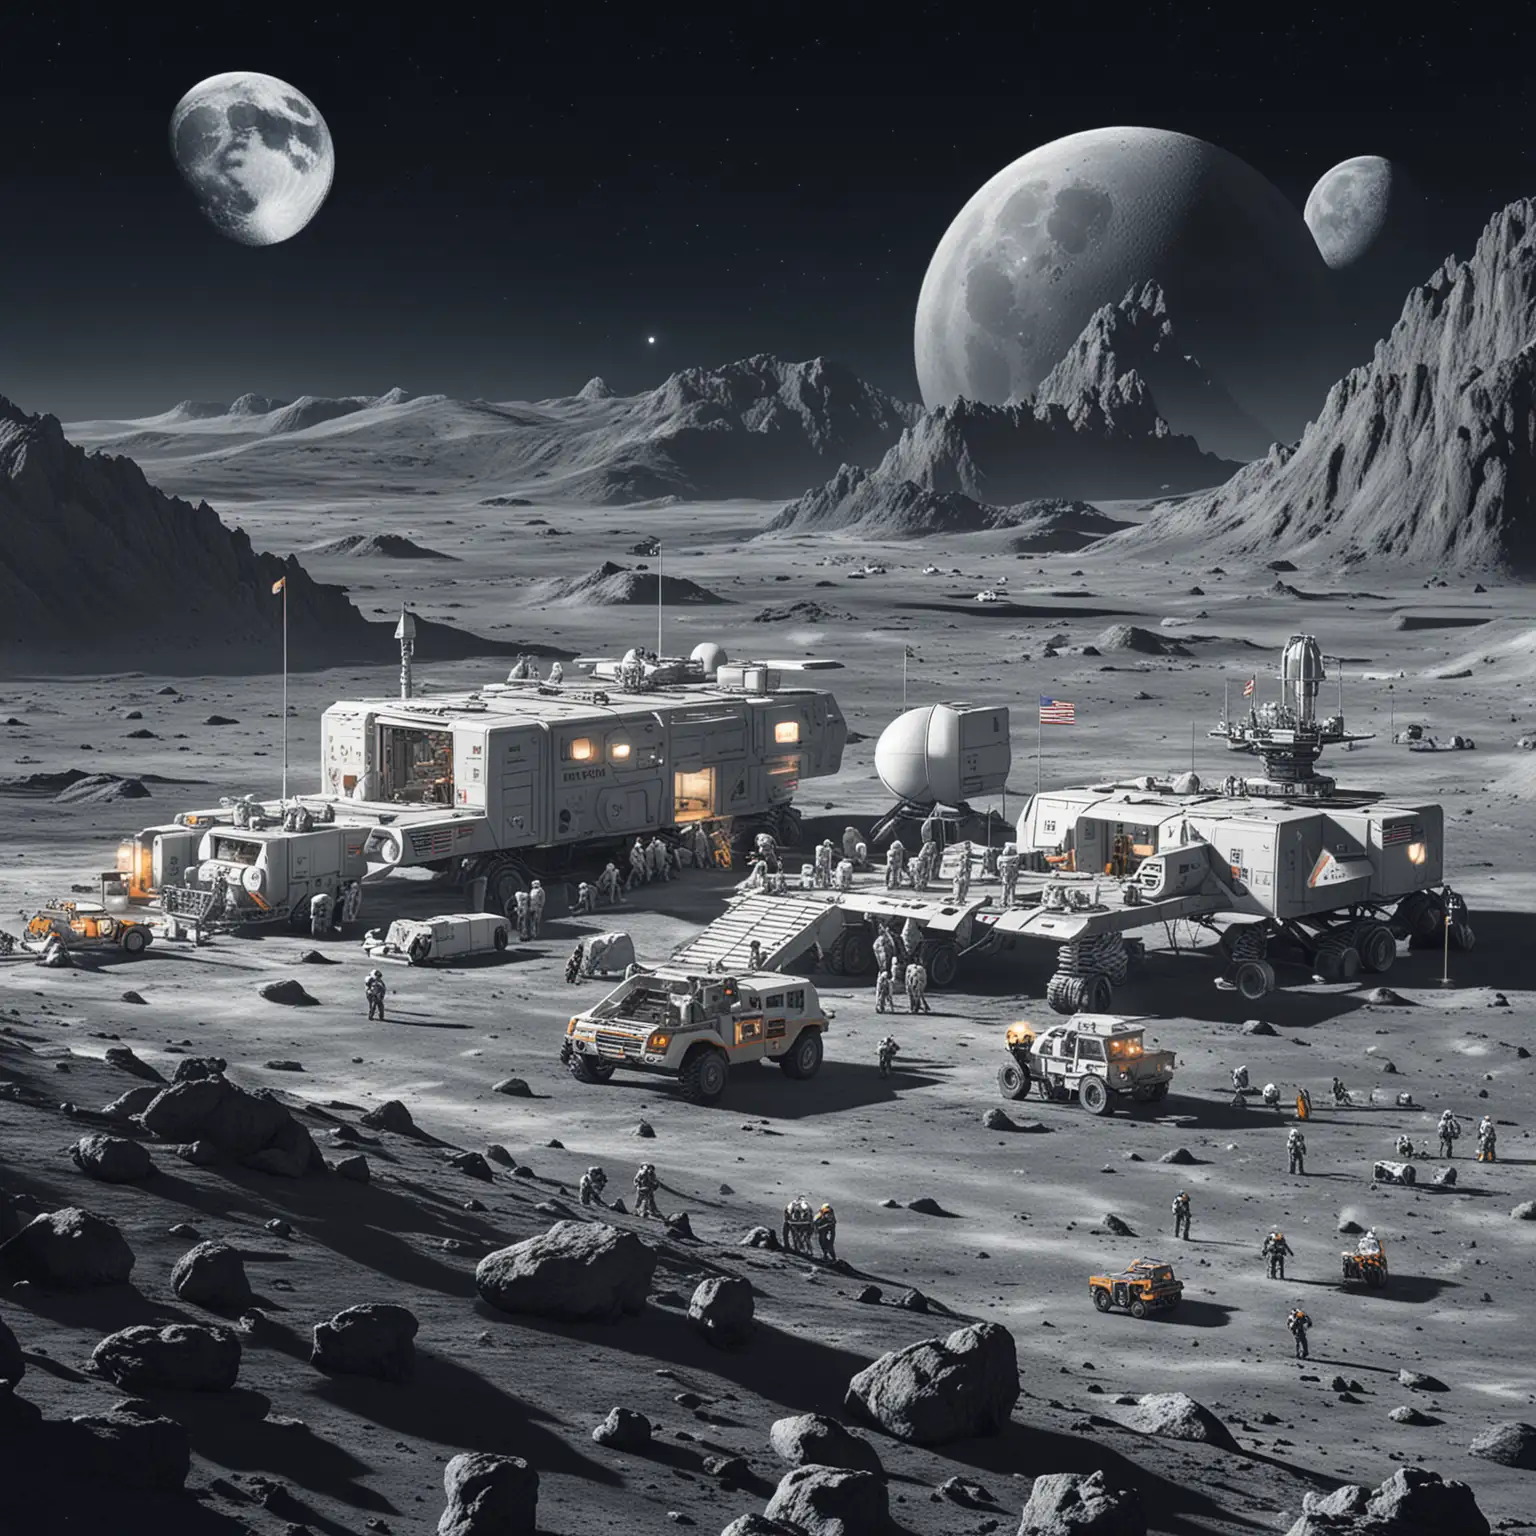 Moon Base Futuristic Lunar Colony with Advanced Technology and Sustainable Living